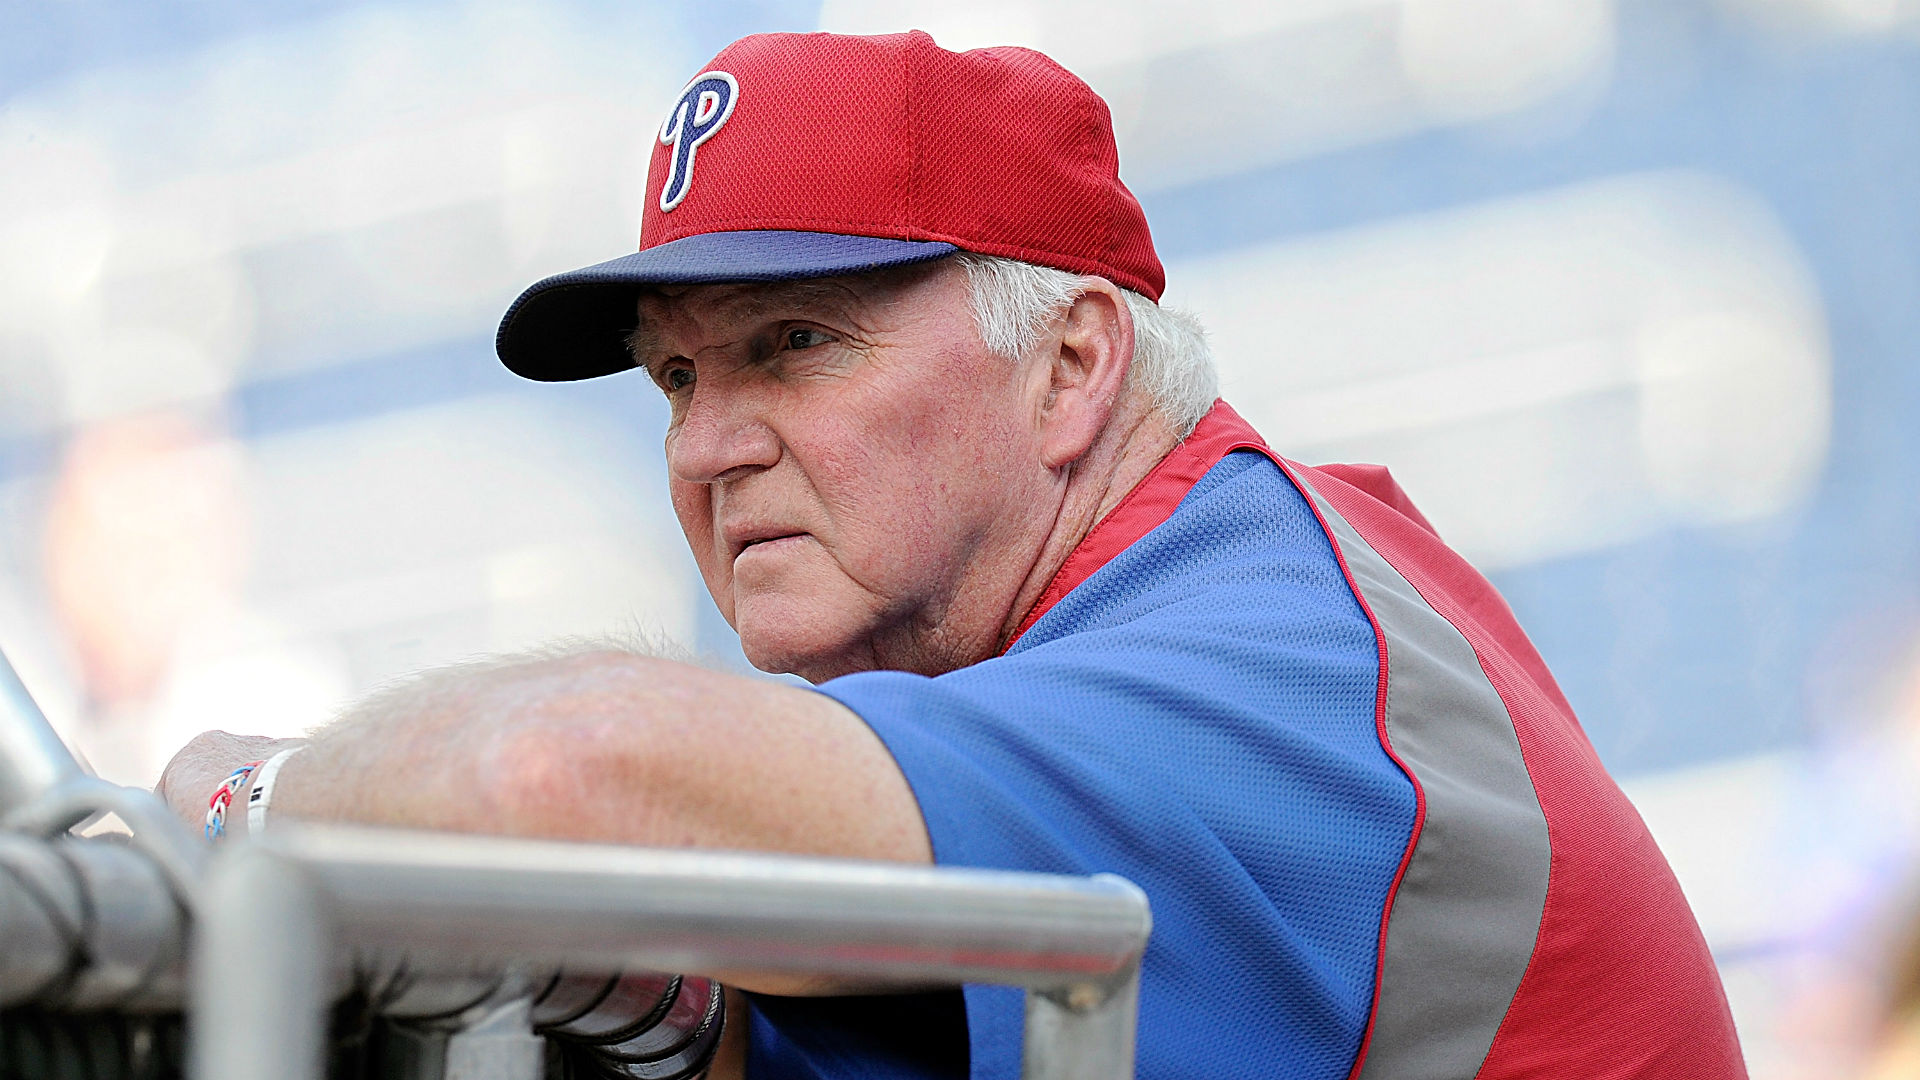 The decision comes after the Phillies fired John Mallee as their hitting coach on Tuesday.